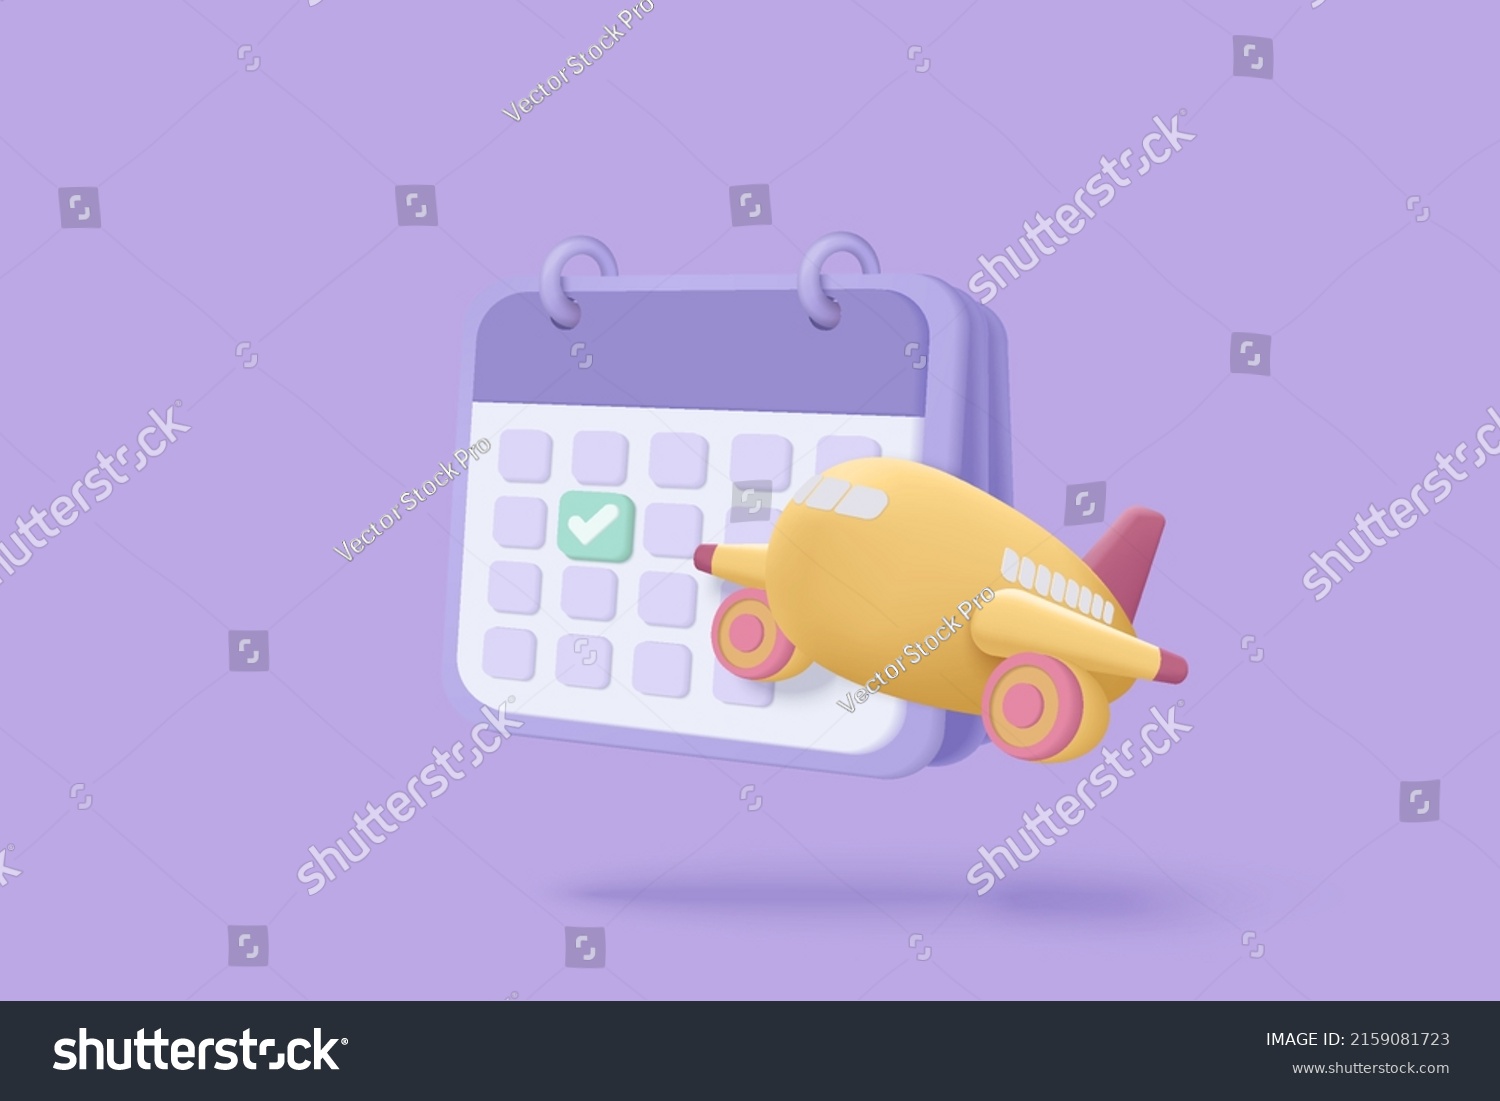 SVG of 3d calendar marked date for booking ticket plane day on travel holiday. Calendar with mark for schedule appointment, event day, holiday planning concept 3d flight airplane vector render illustration svg